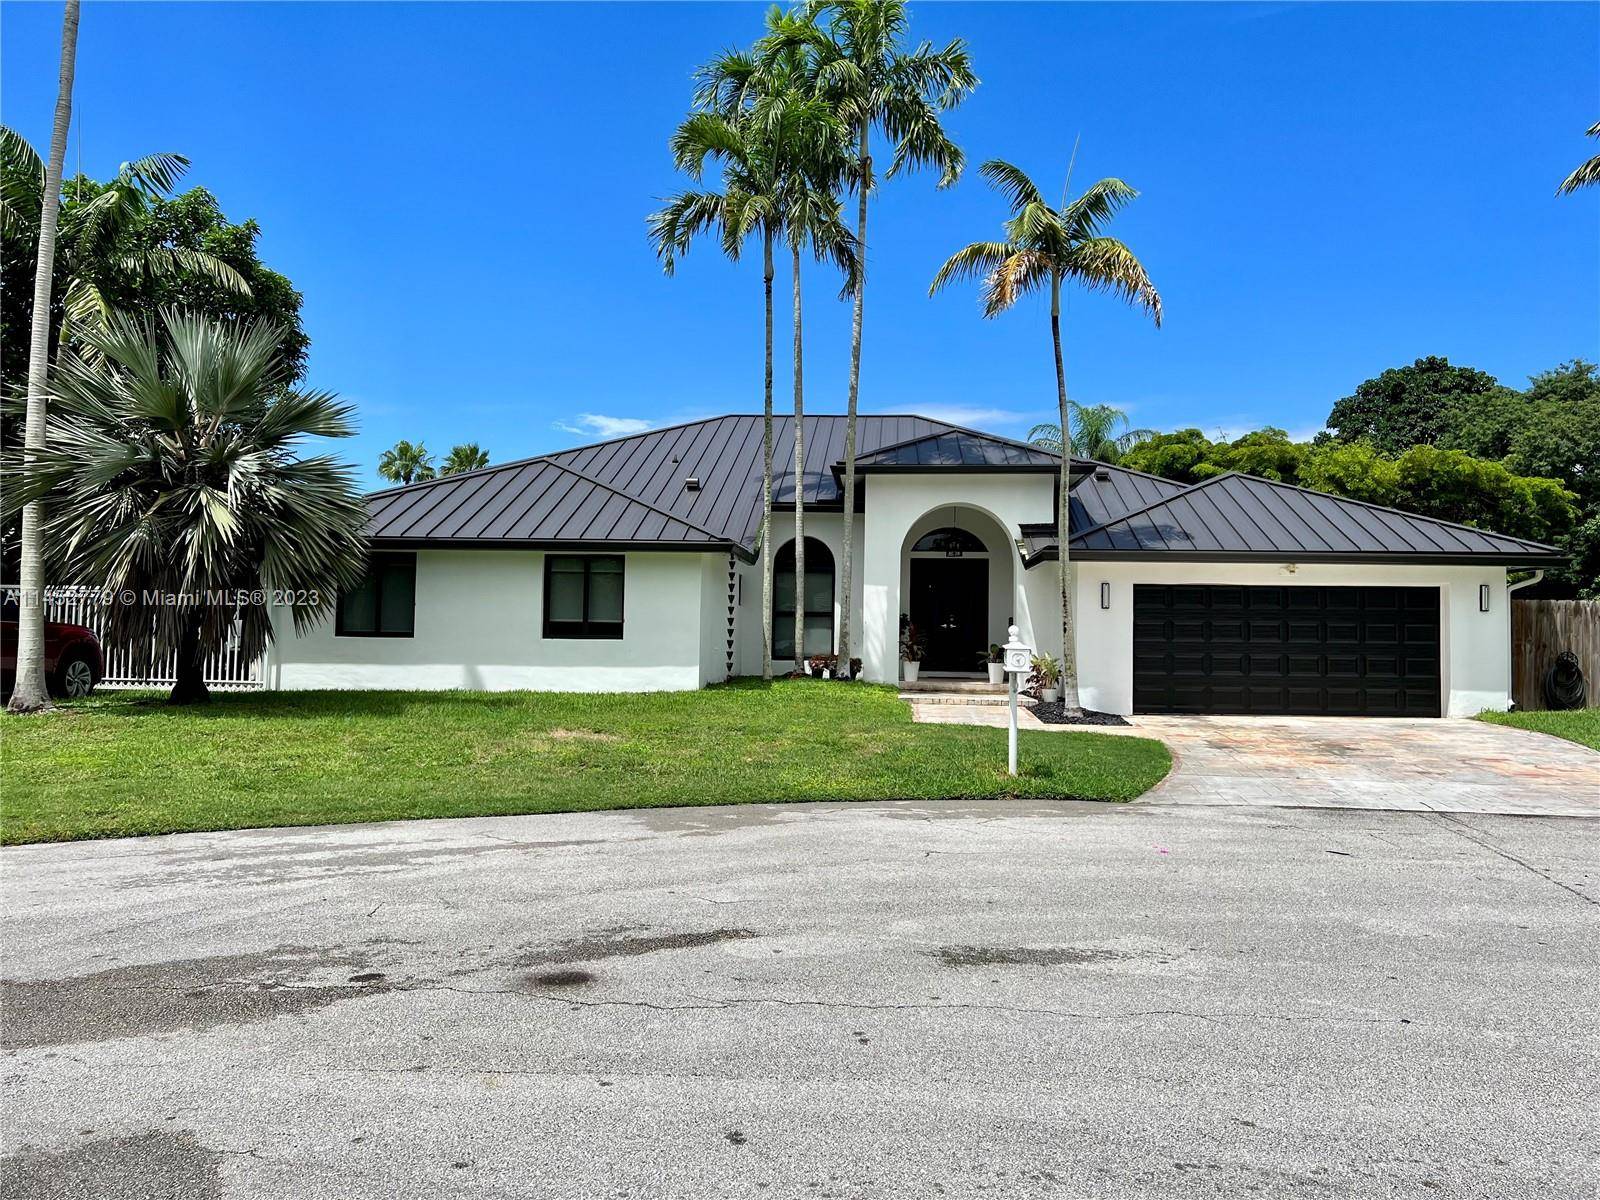 Modern, spacious and remodeled home in a cul de sac located in north east Cutler Bay.